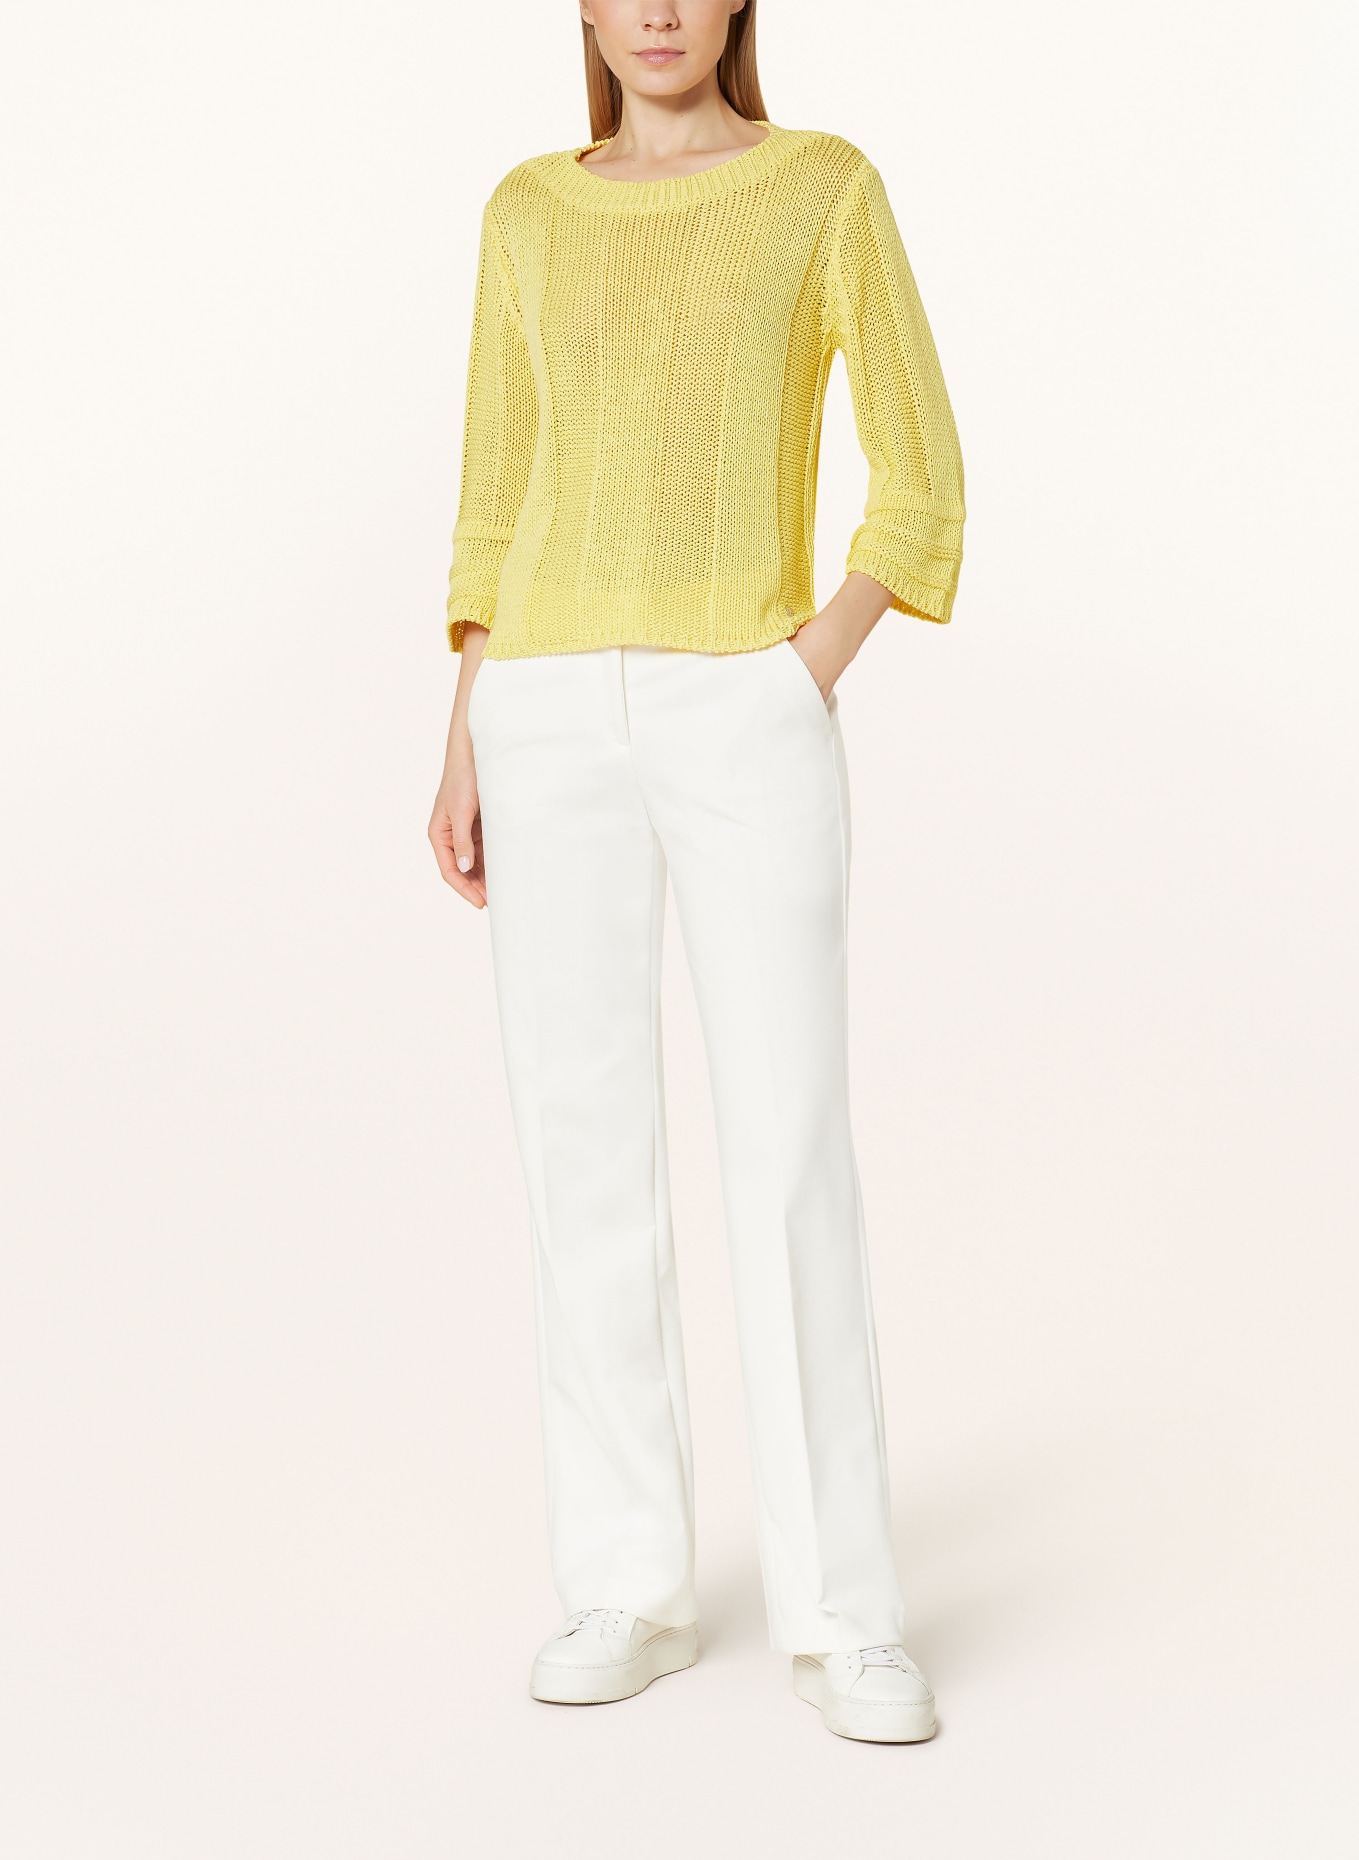 monari Sweater with 3/4 sleeves, Color: YELLOW (Image 2)